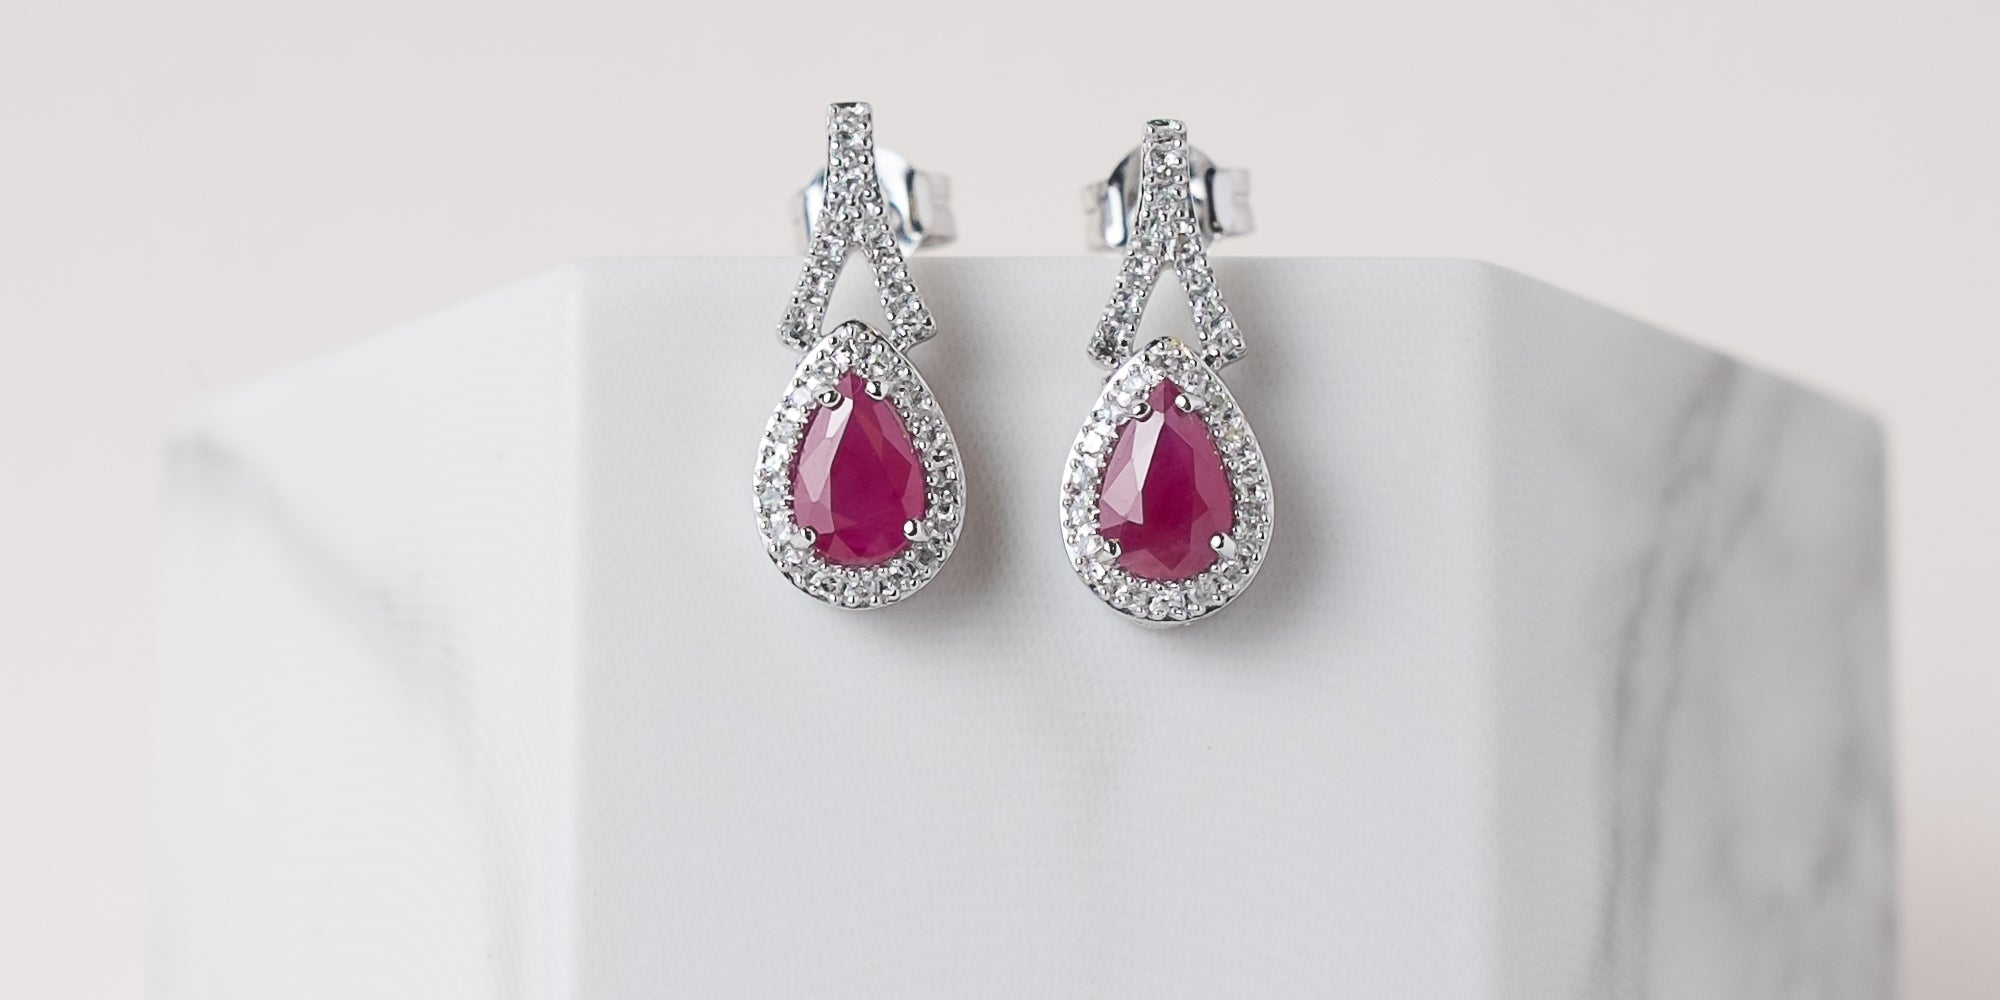 July Birthstone Earrings with Ruby and Diamond